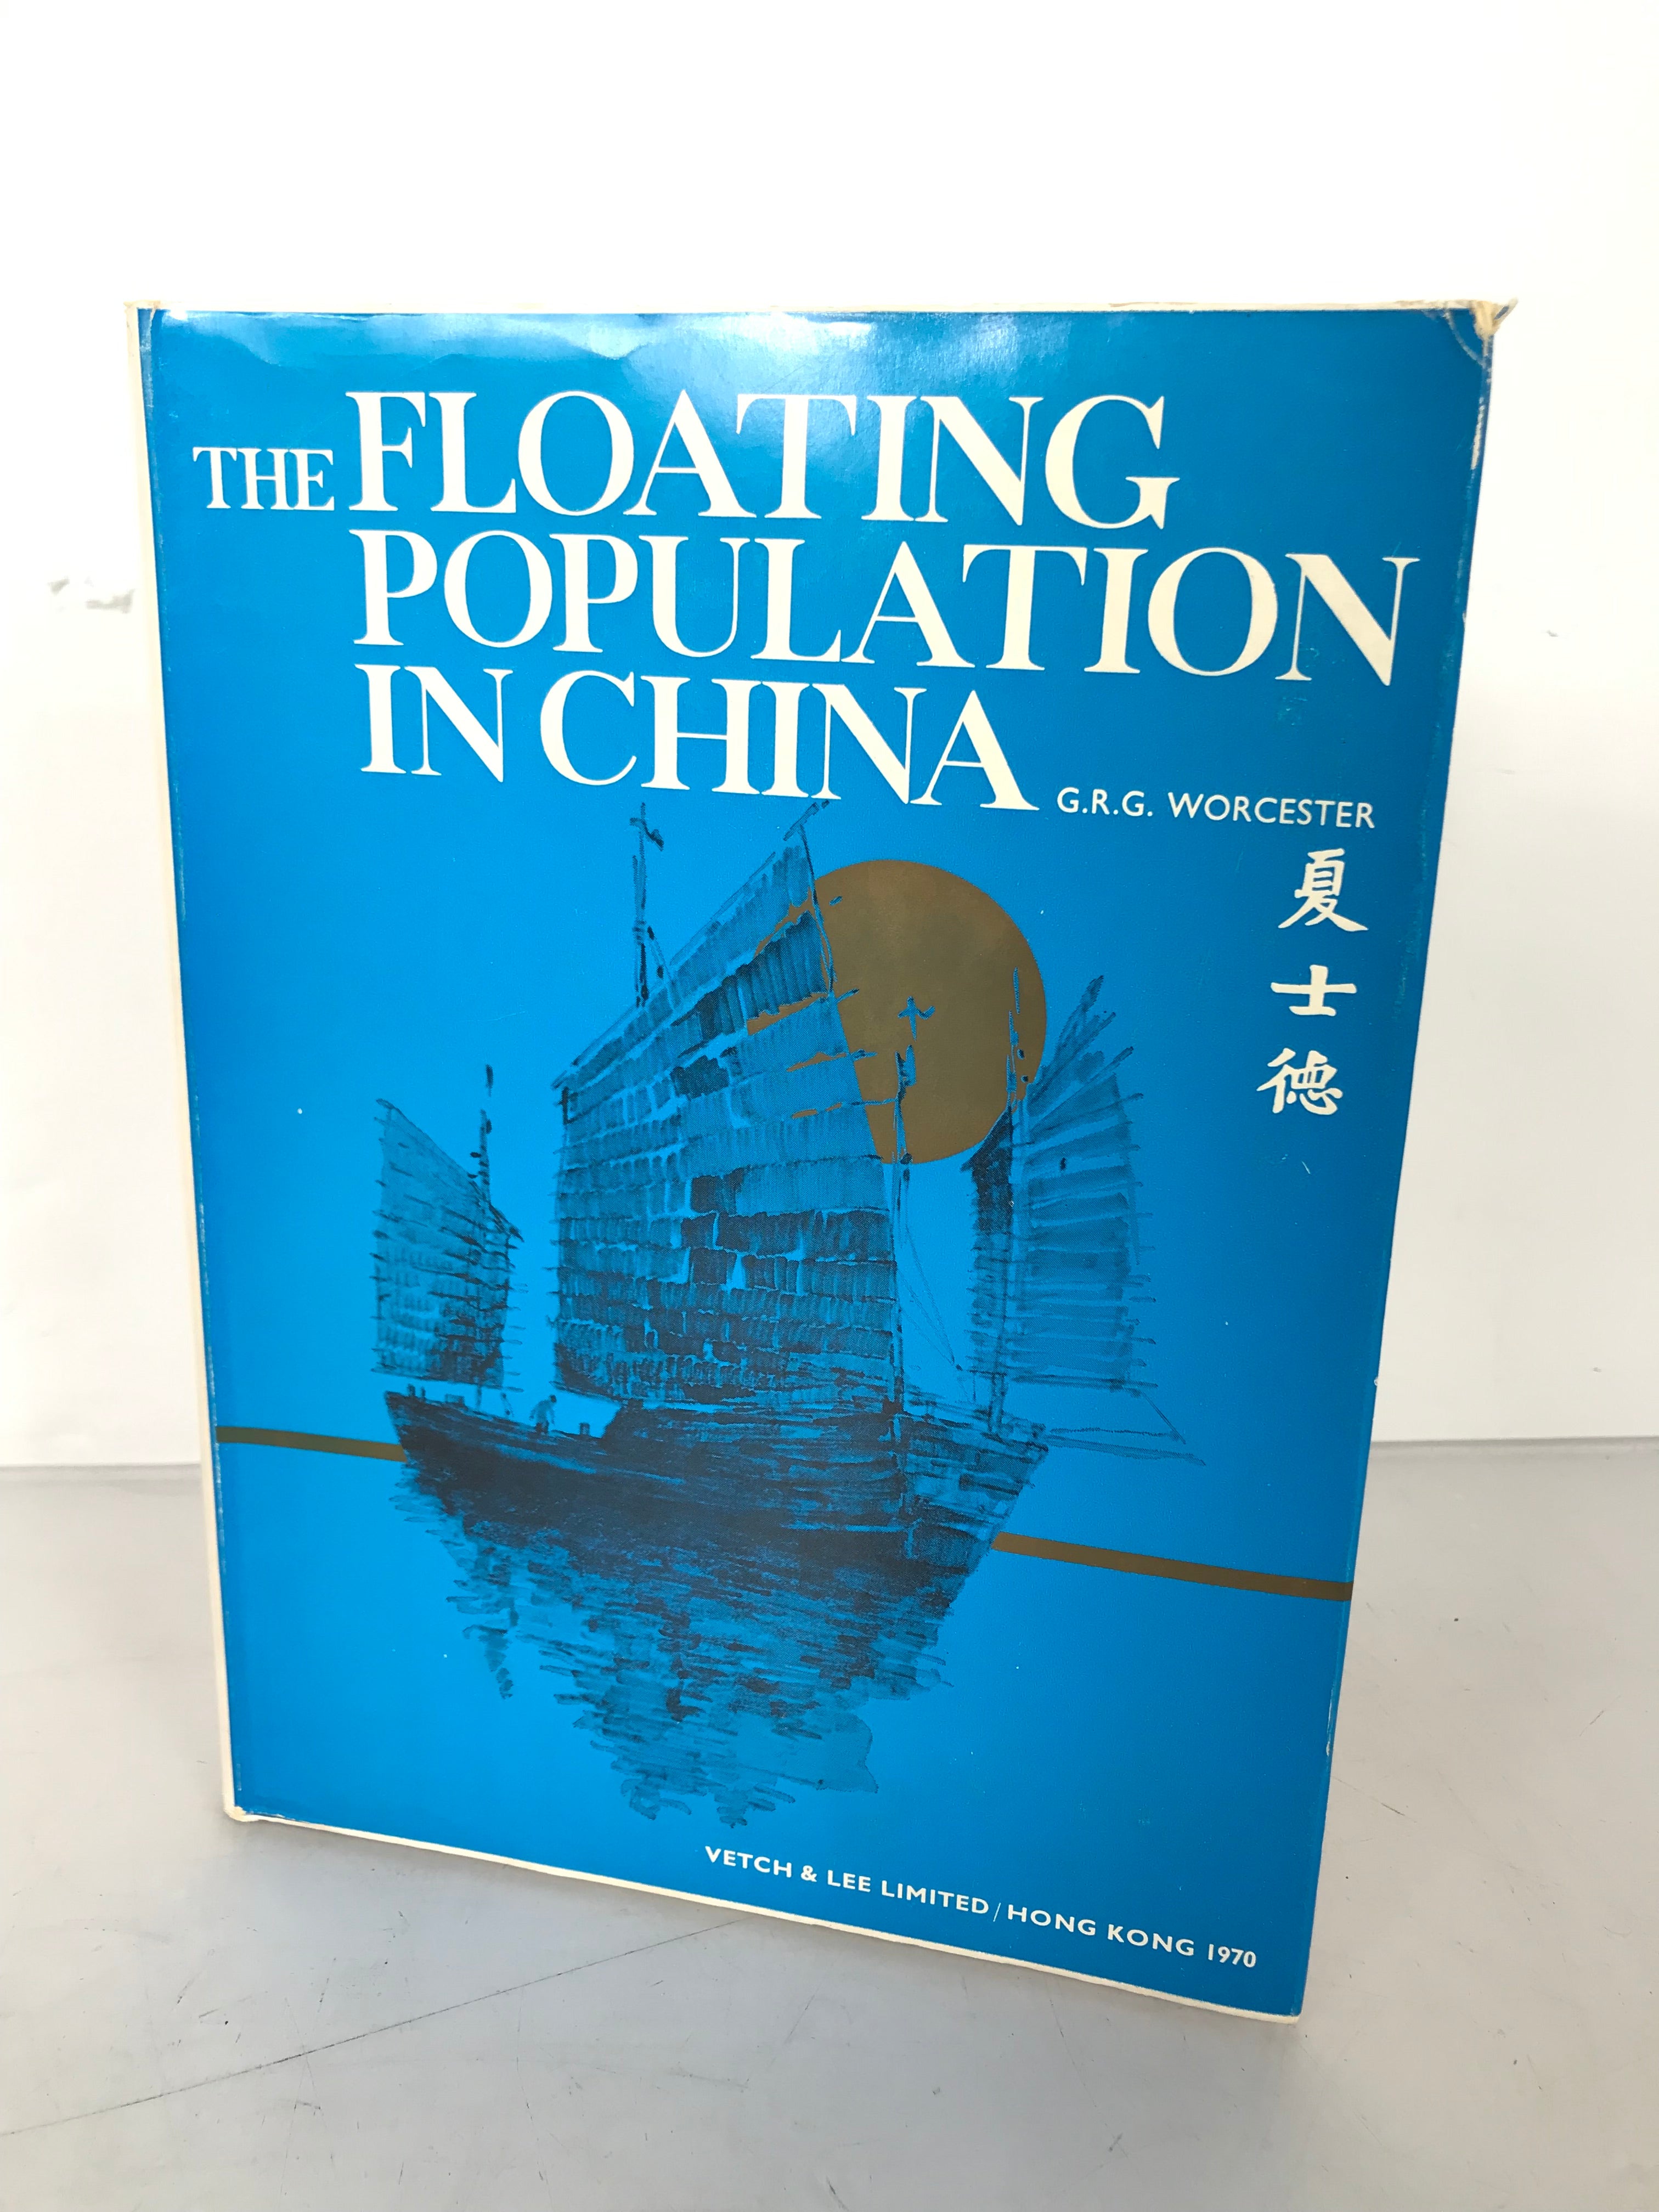 The Floating Population in China by G.R.G. Worcester 1970